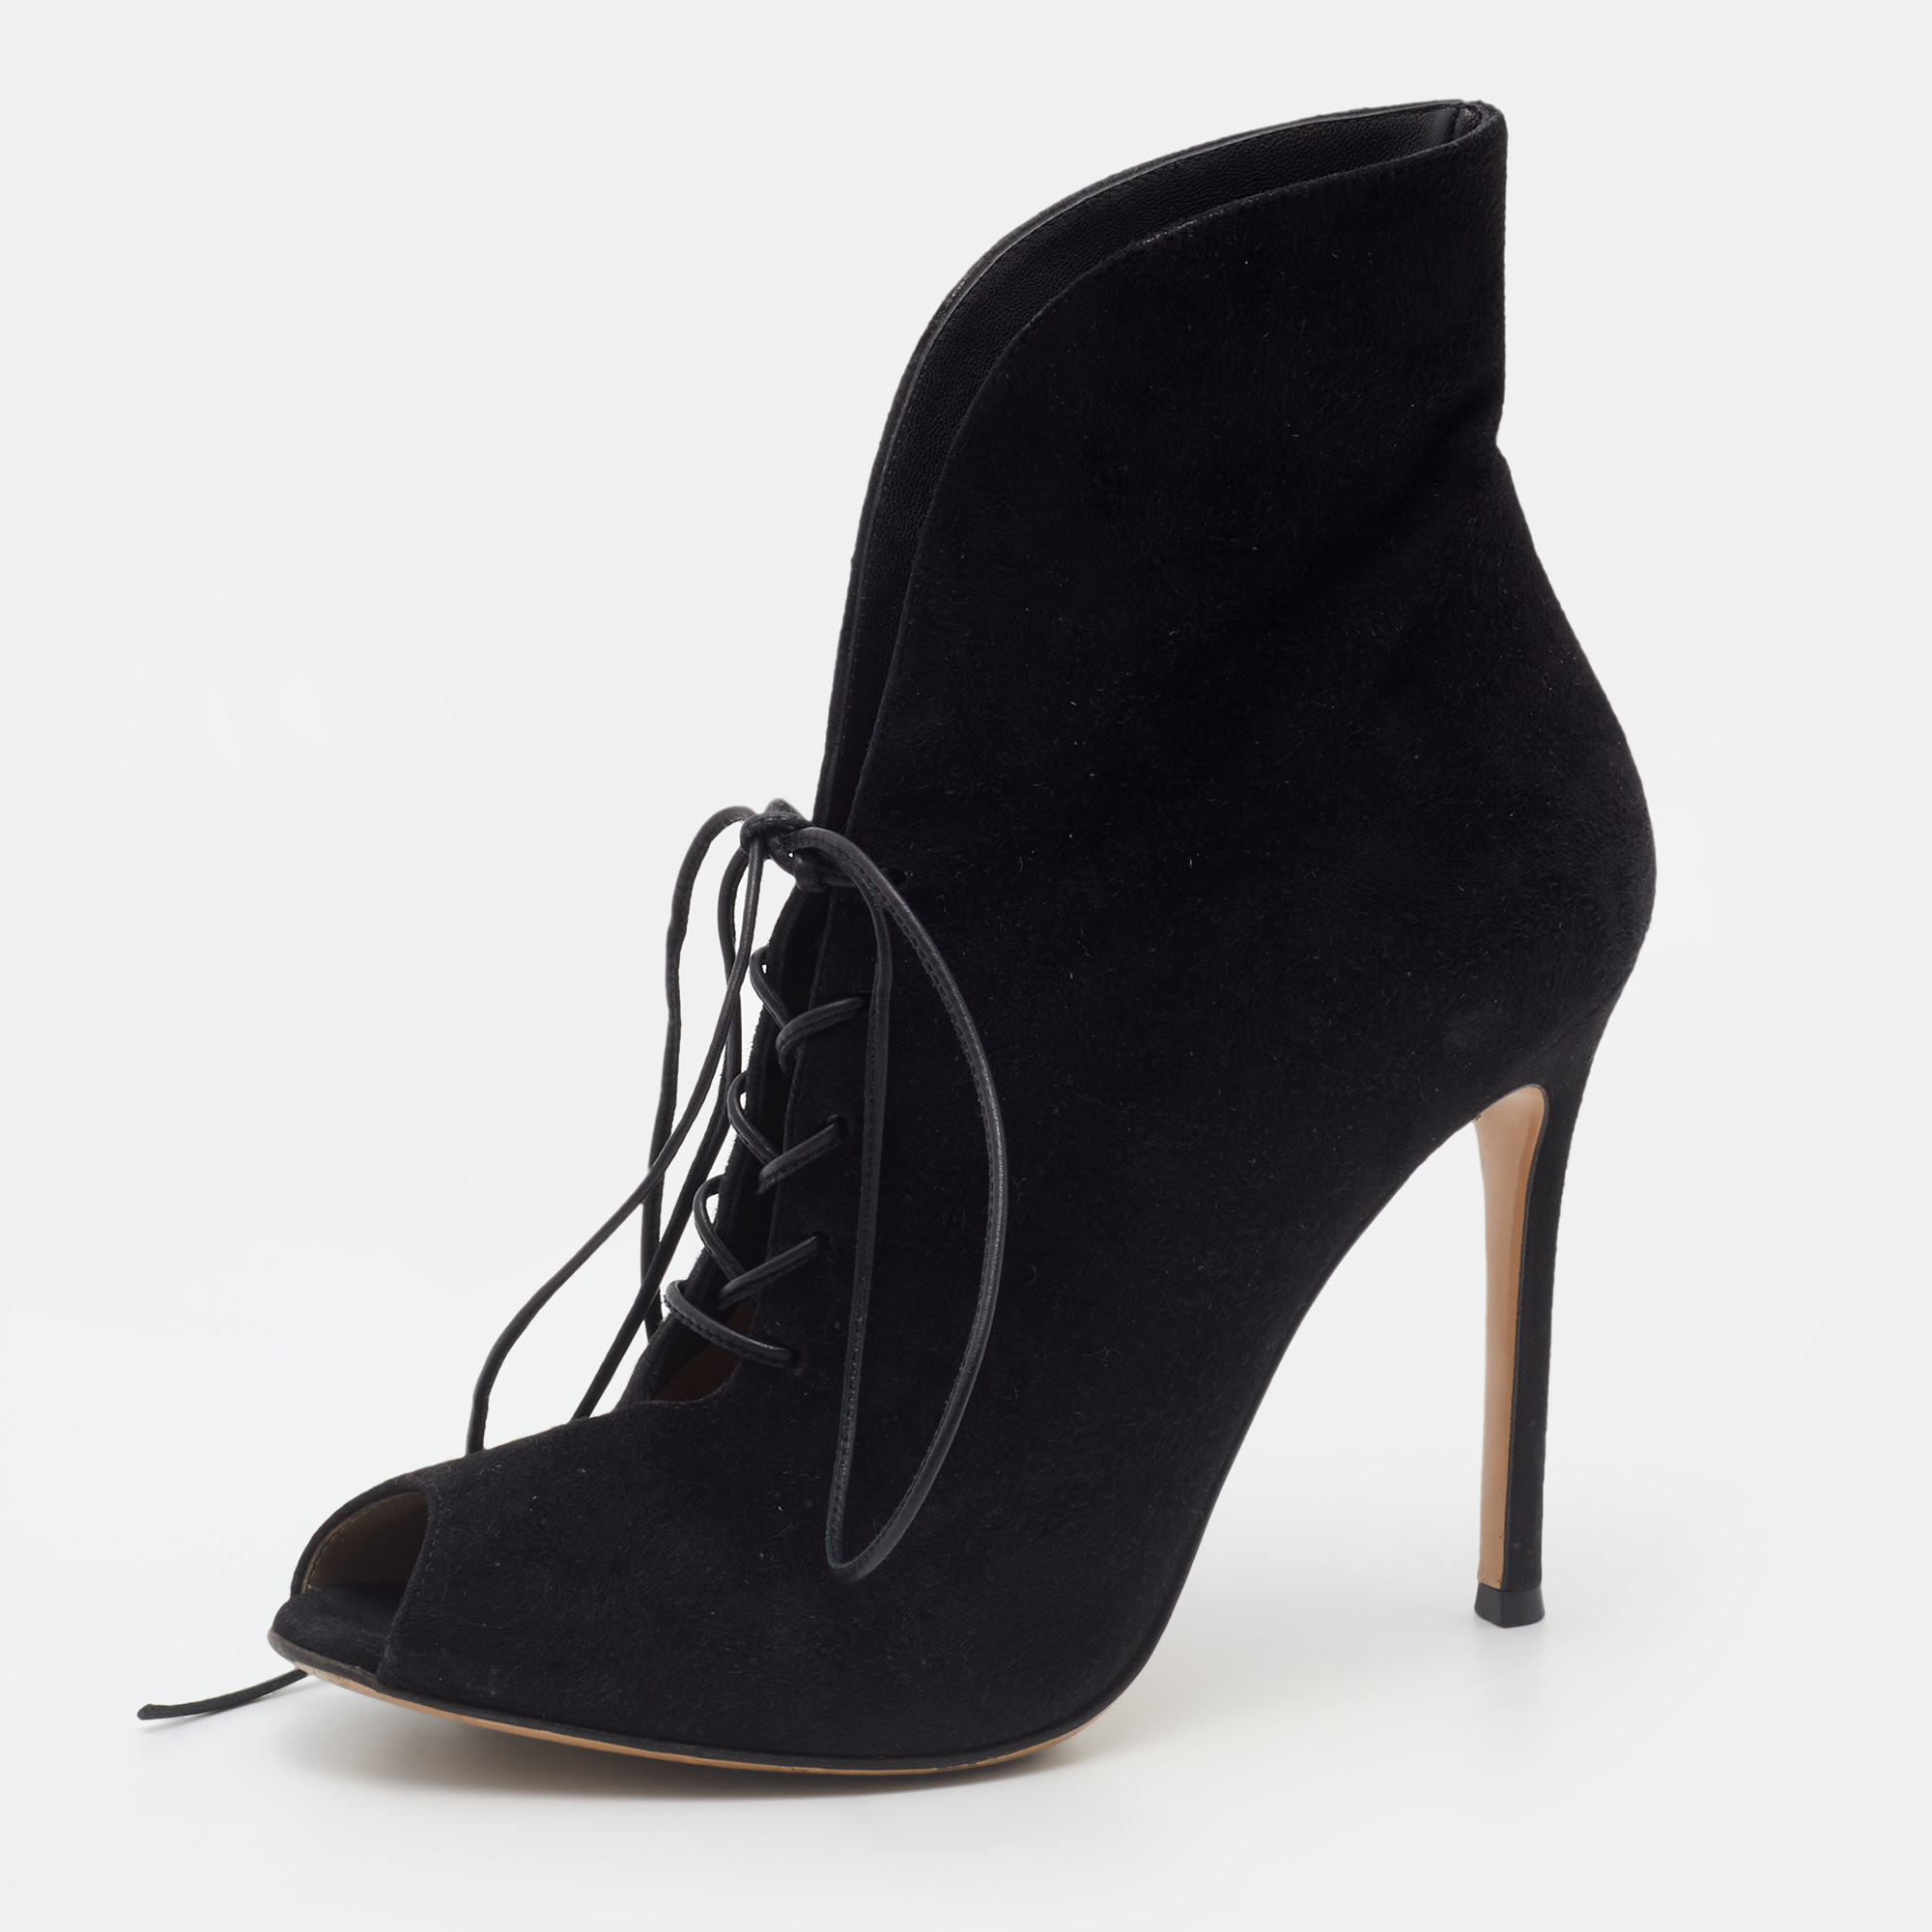 Gianvito rossi black suede jane ankle booties size 38